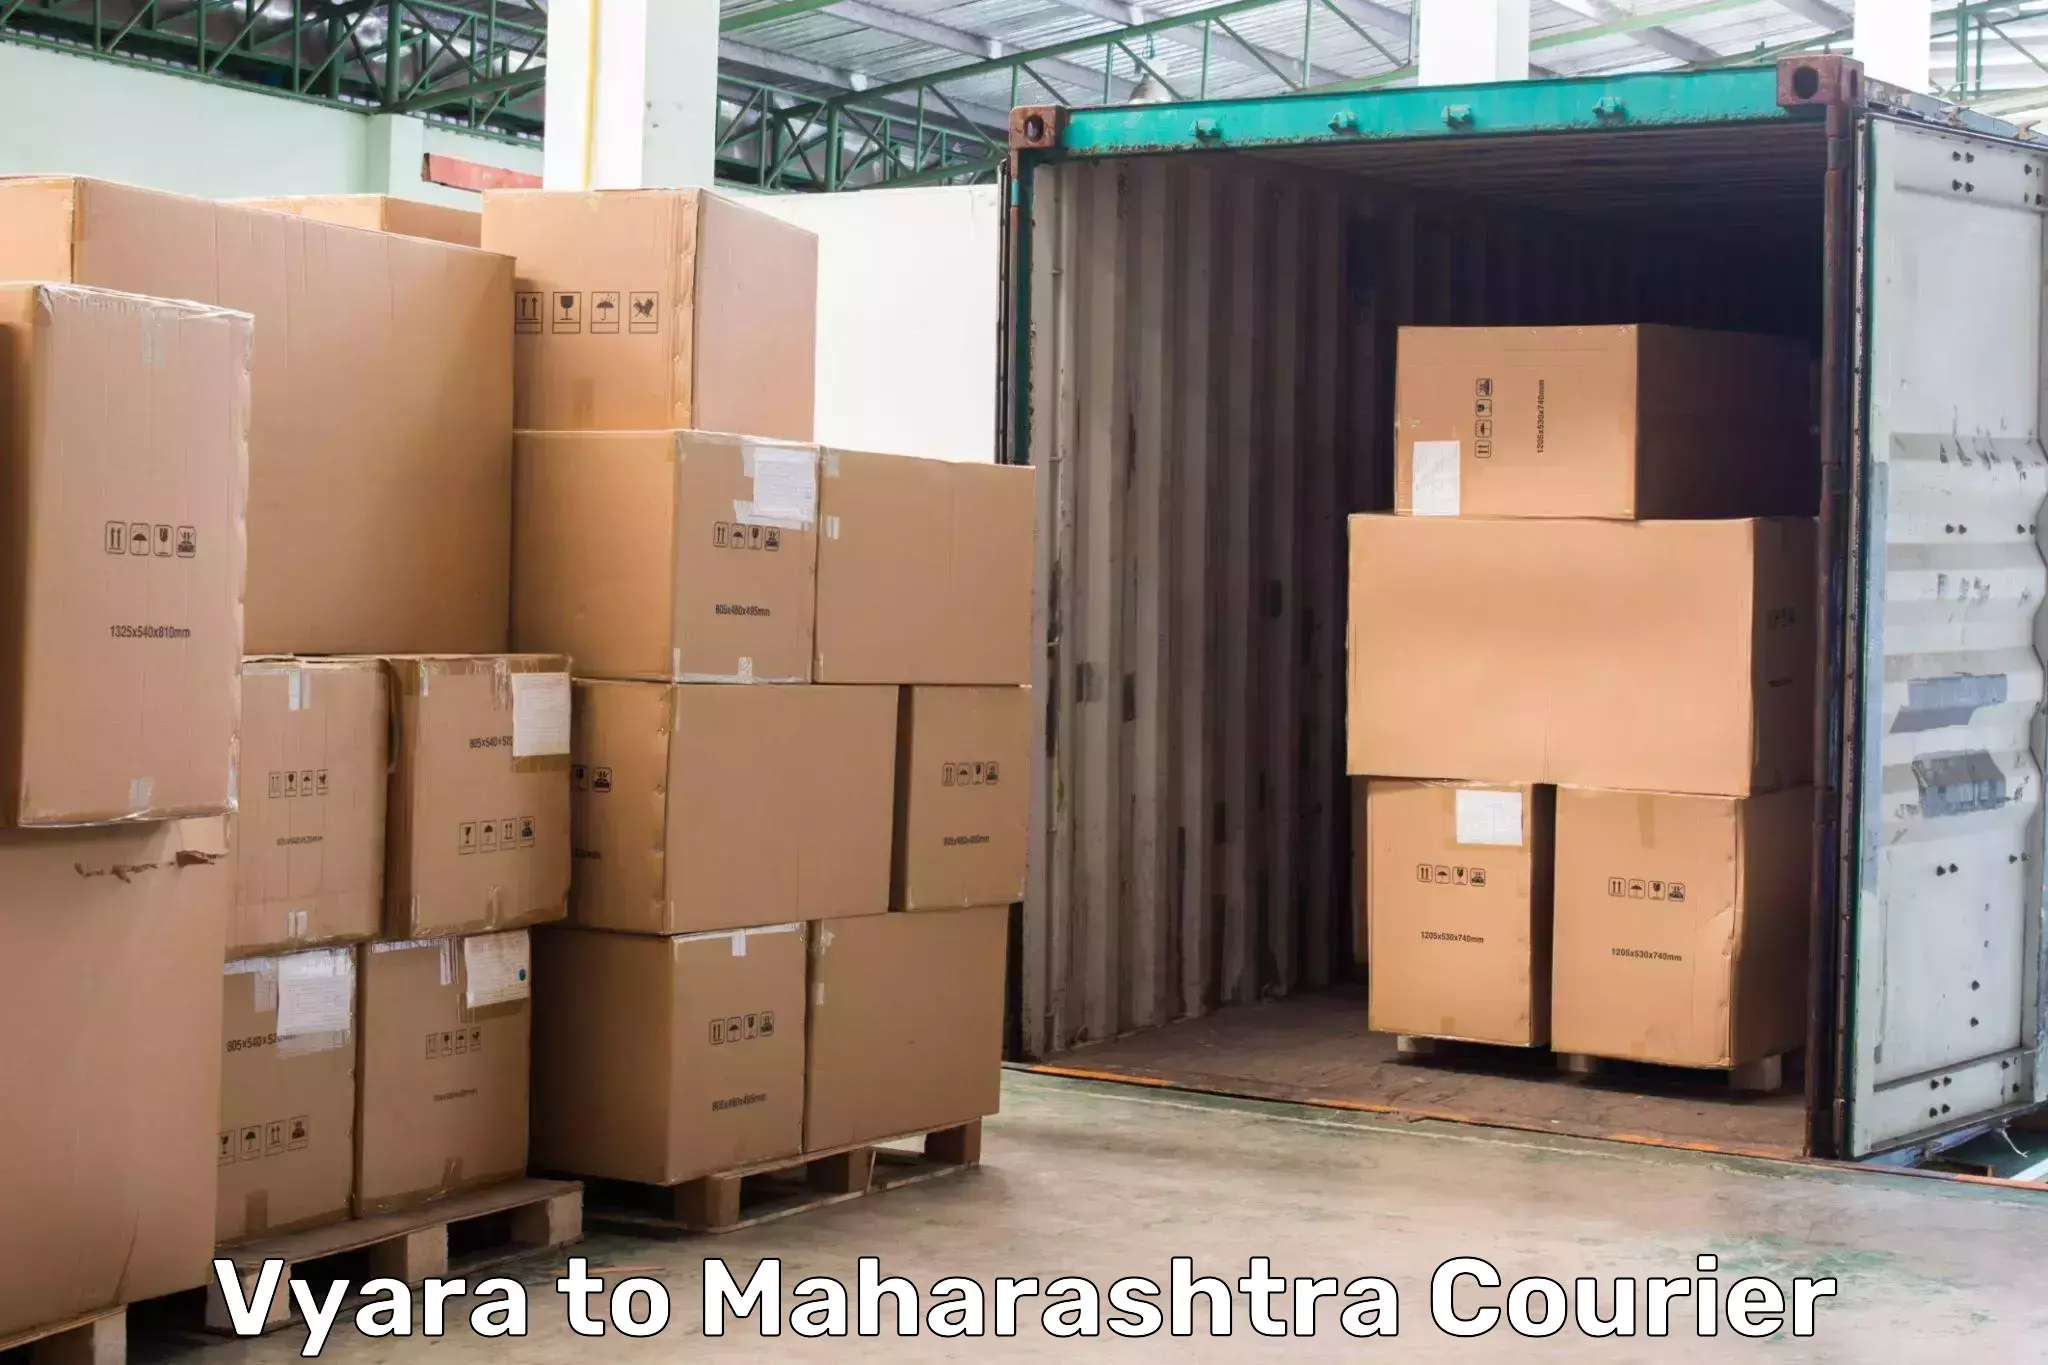 Multi-national courier services Vyara to Talere